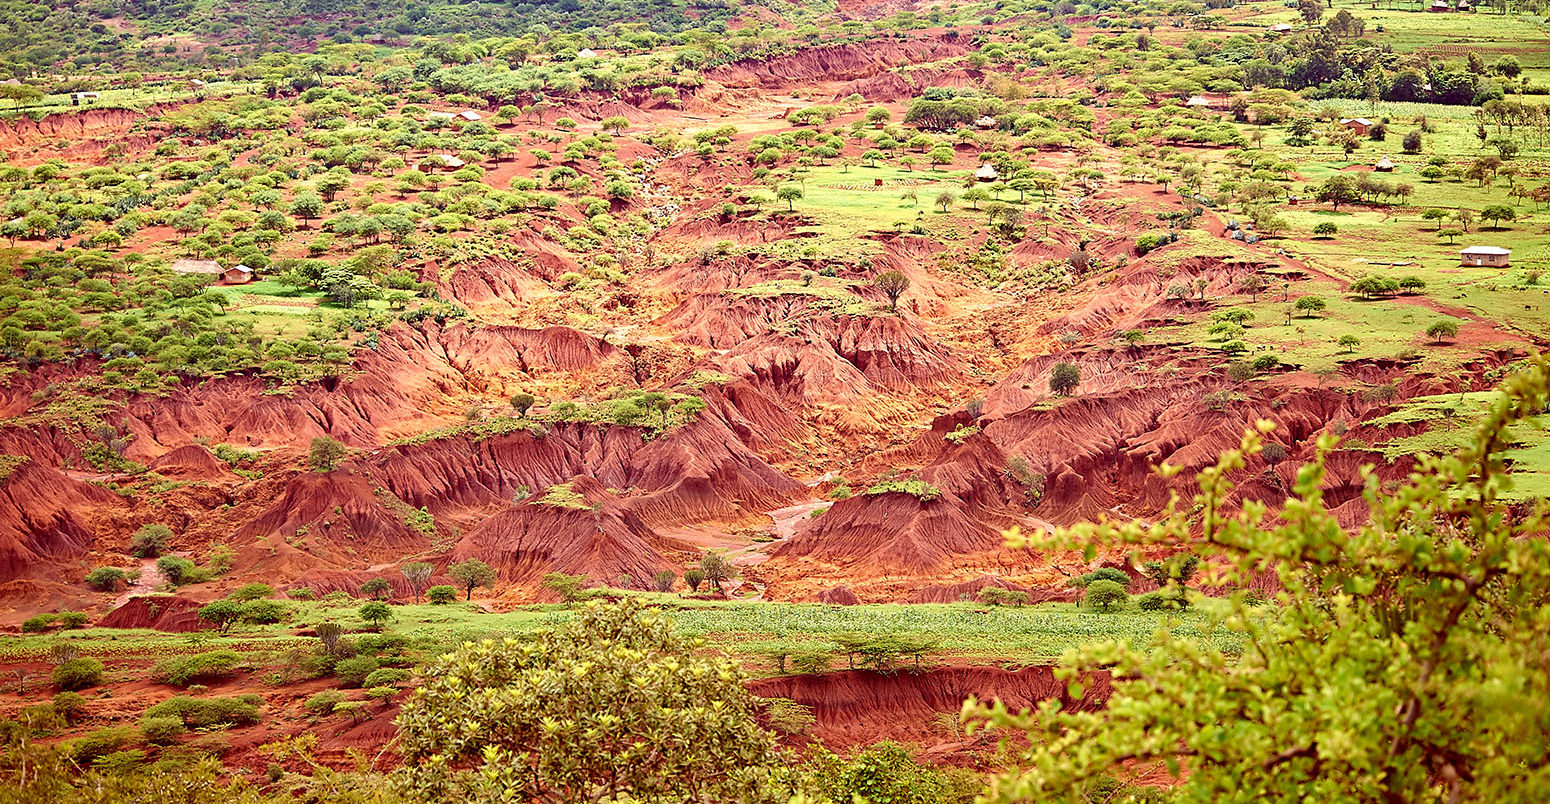 Land erosion caused by deforestation and over-farming, Ngorongoro Highlands, Tanzania. Credit: Stephan Schramm / Alamy Stock Photo. HFA65N